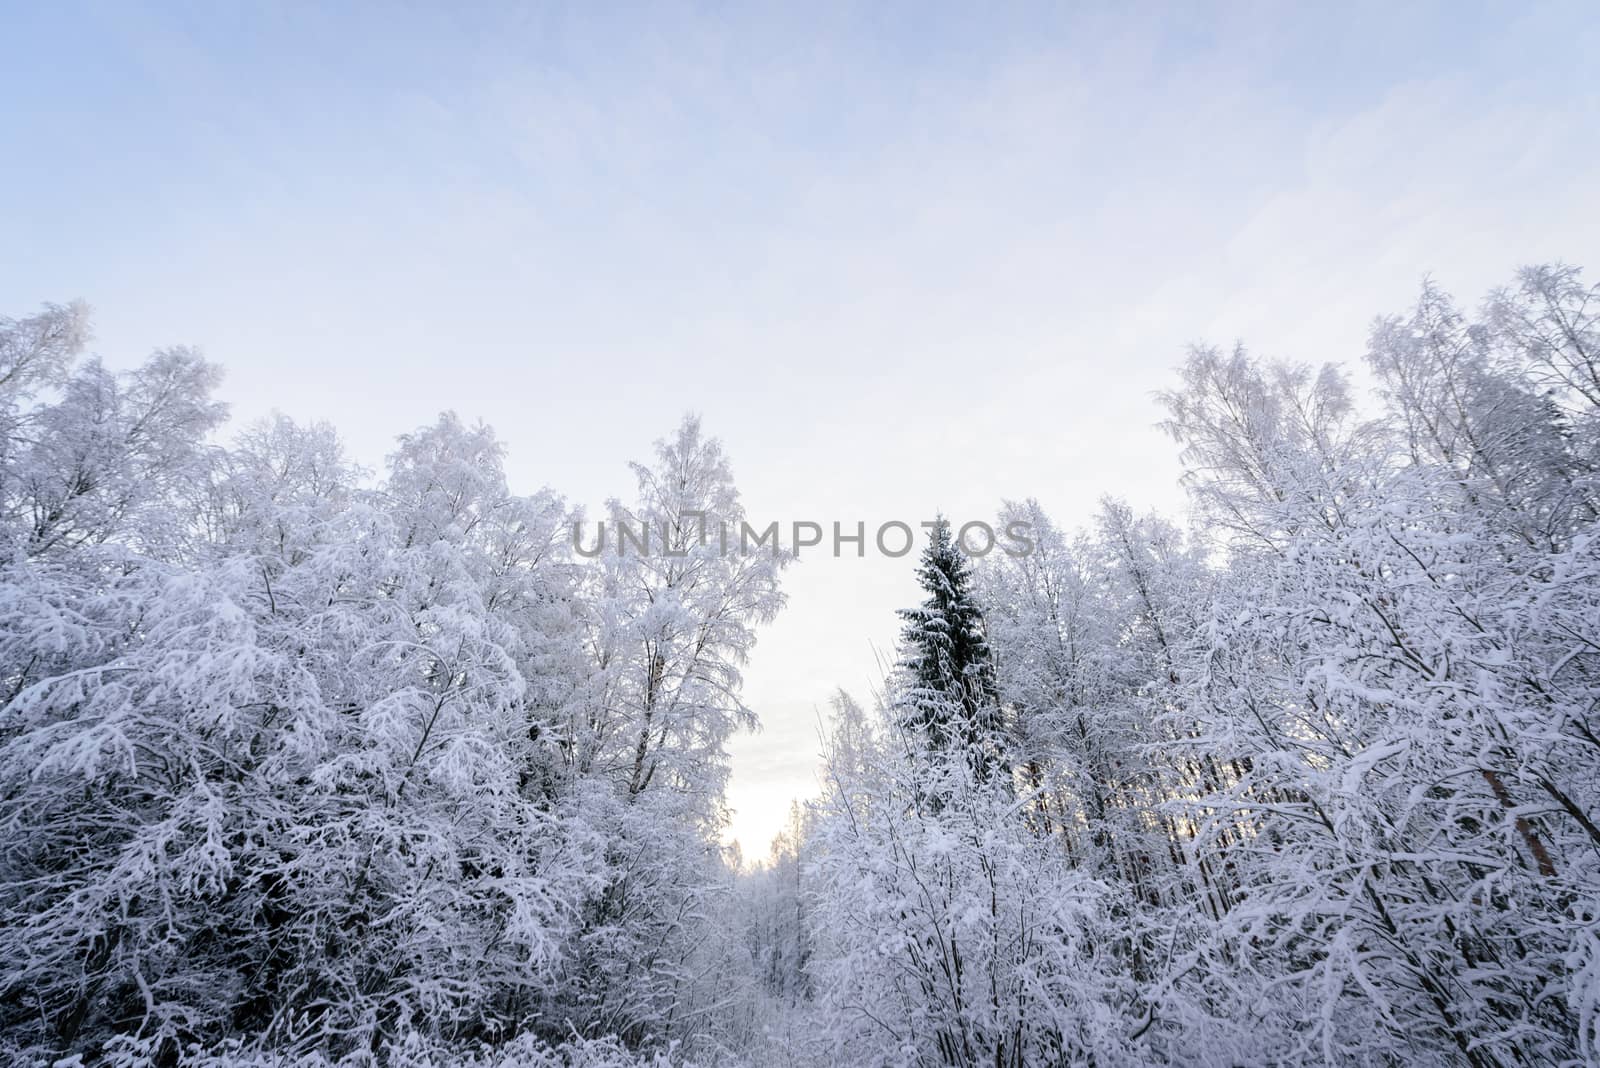 The forest has covered with heavy snow in winter season at Lapland, Finland.